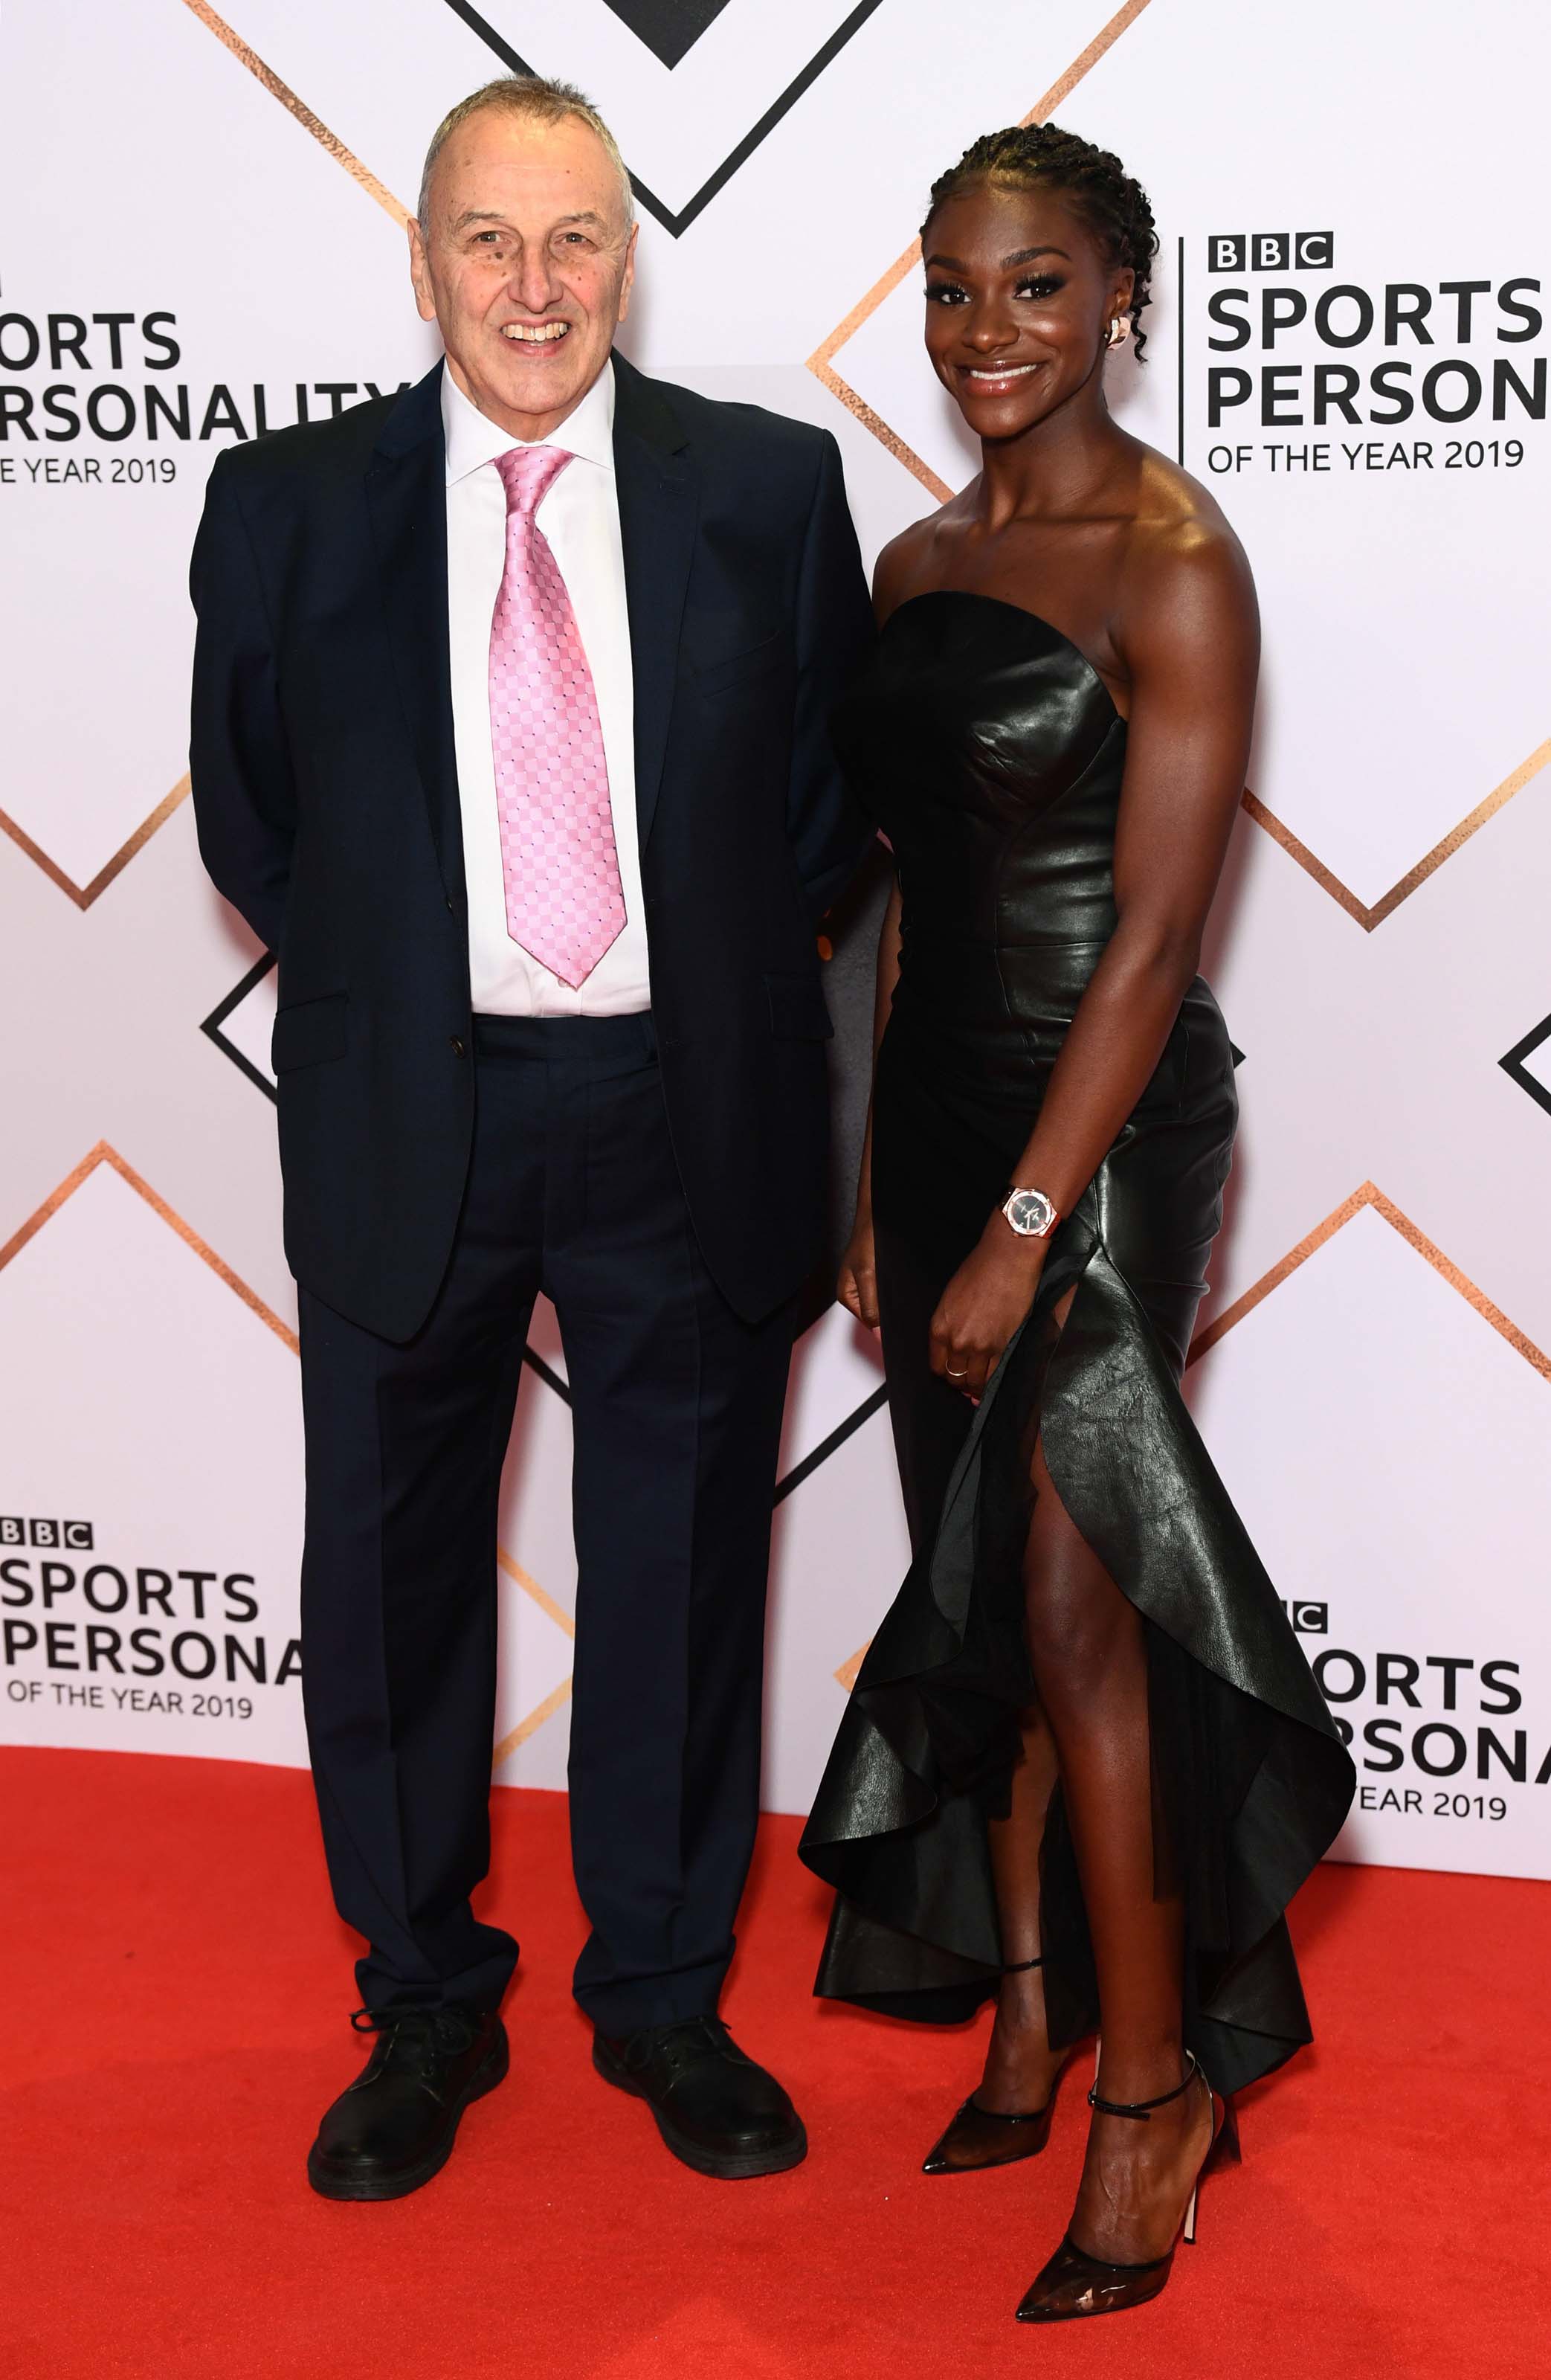 Dina Asher Smith attends BBC Sports Personality of the Year